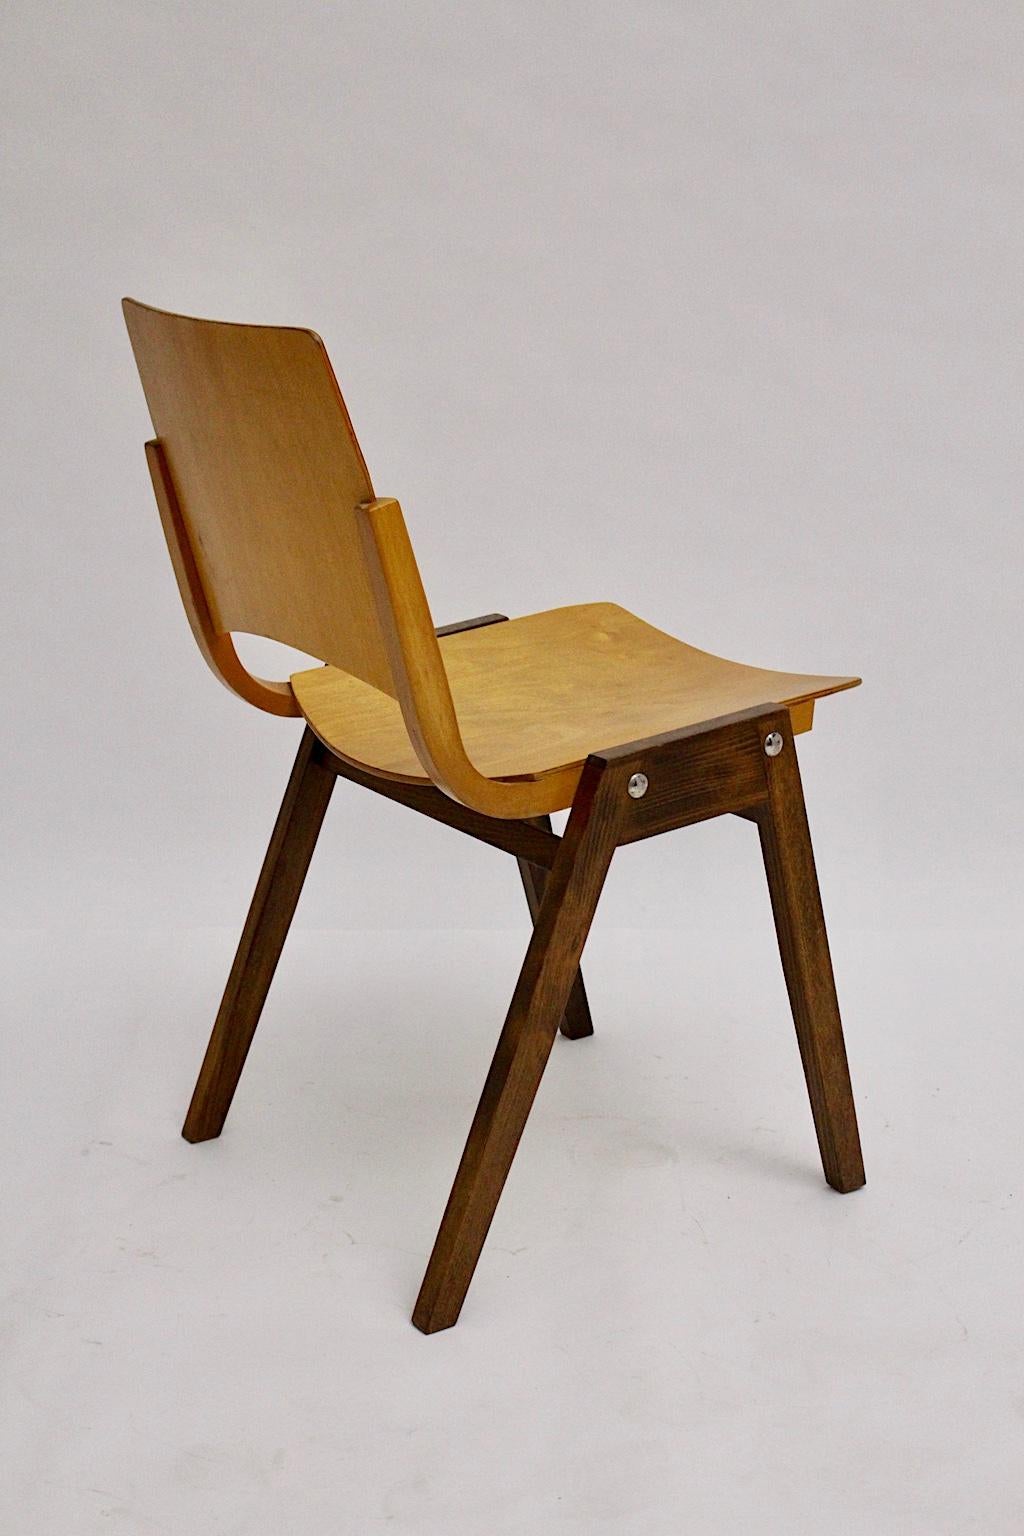 Mid-Century Modern Vintage Beech Bicolor Dining Chairs Roland Rainer 1952 Vienna For Sale 6